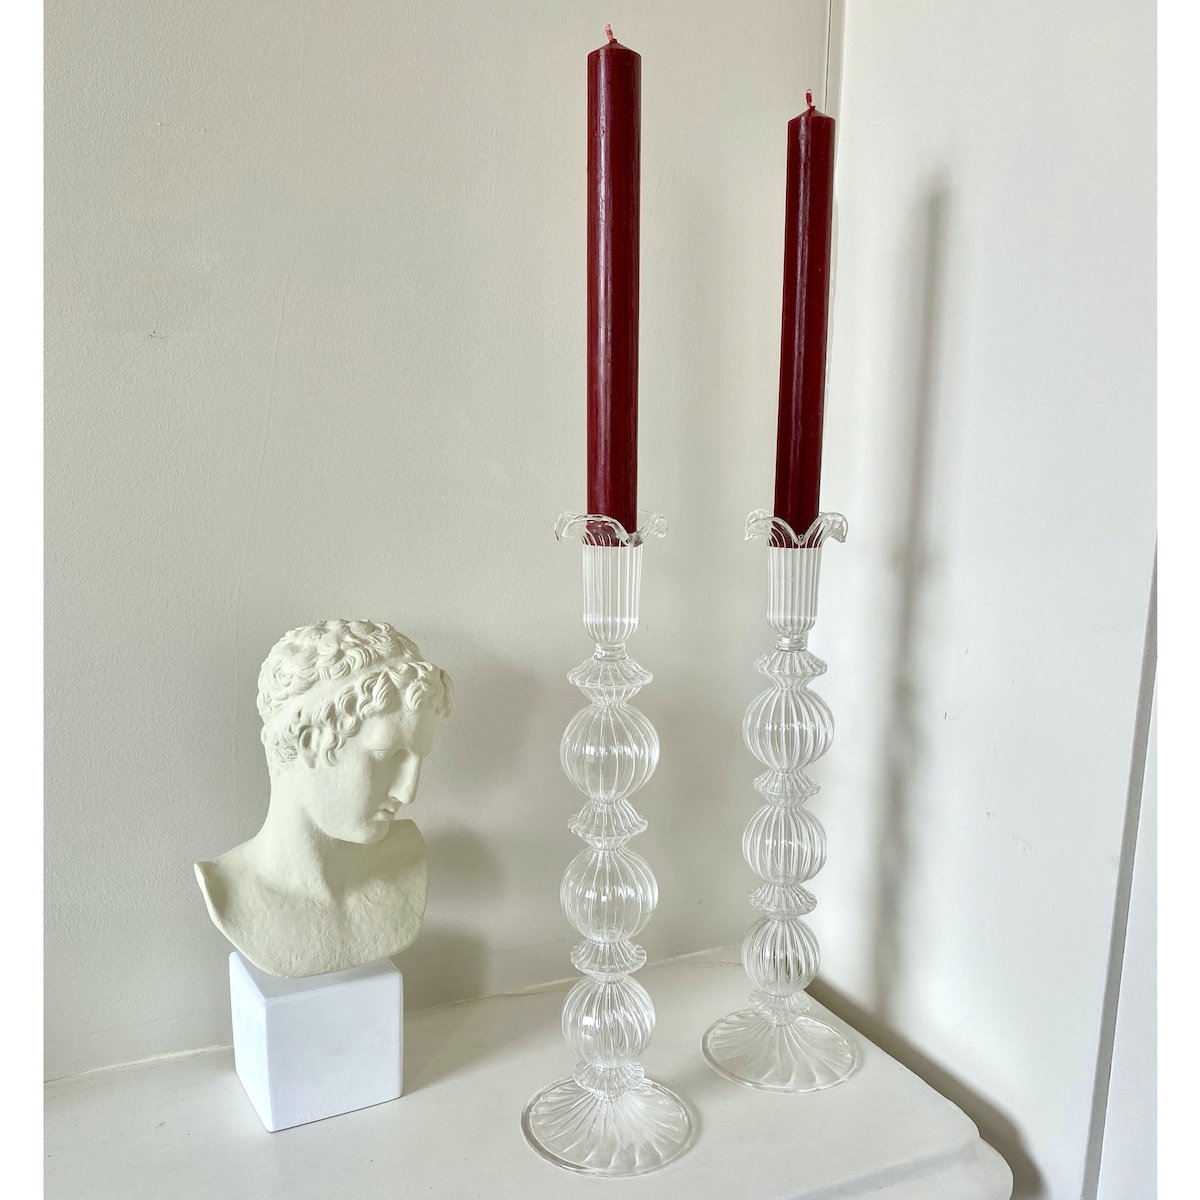 Issy Granger Glass Candle Holder | Red Wax Dinner Candles